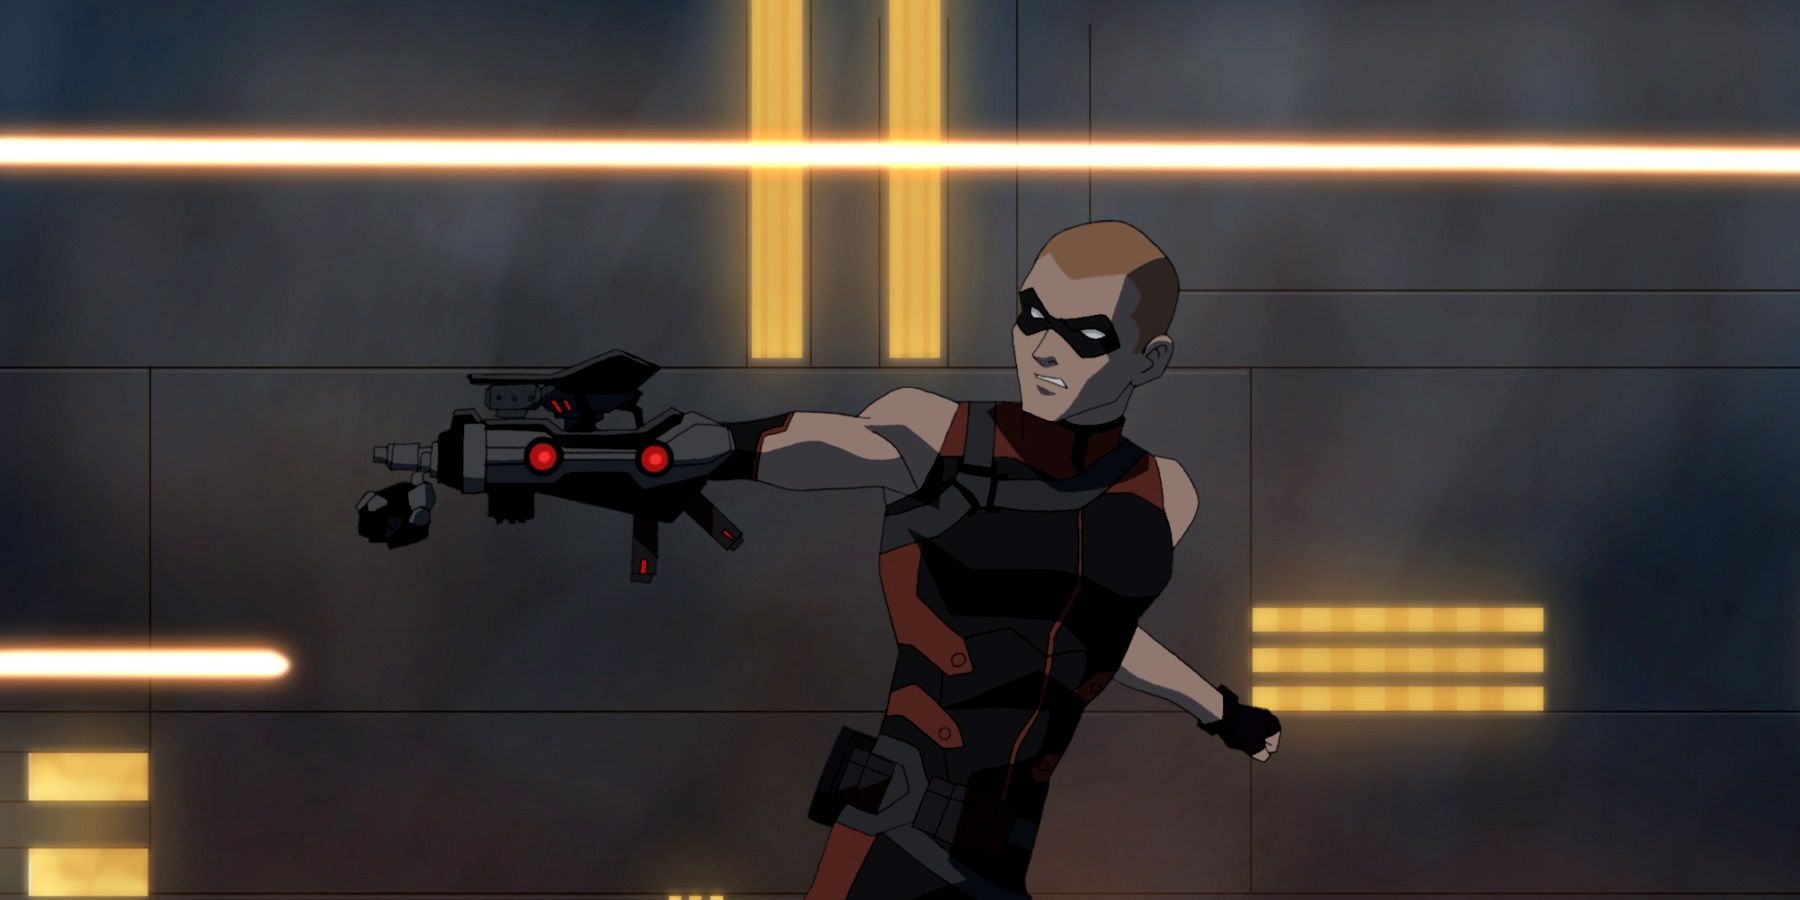 The Main Characters In Young Justice Ranked LeastMost Likely To Win The Hunger Games